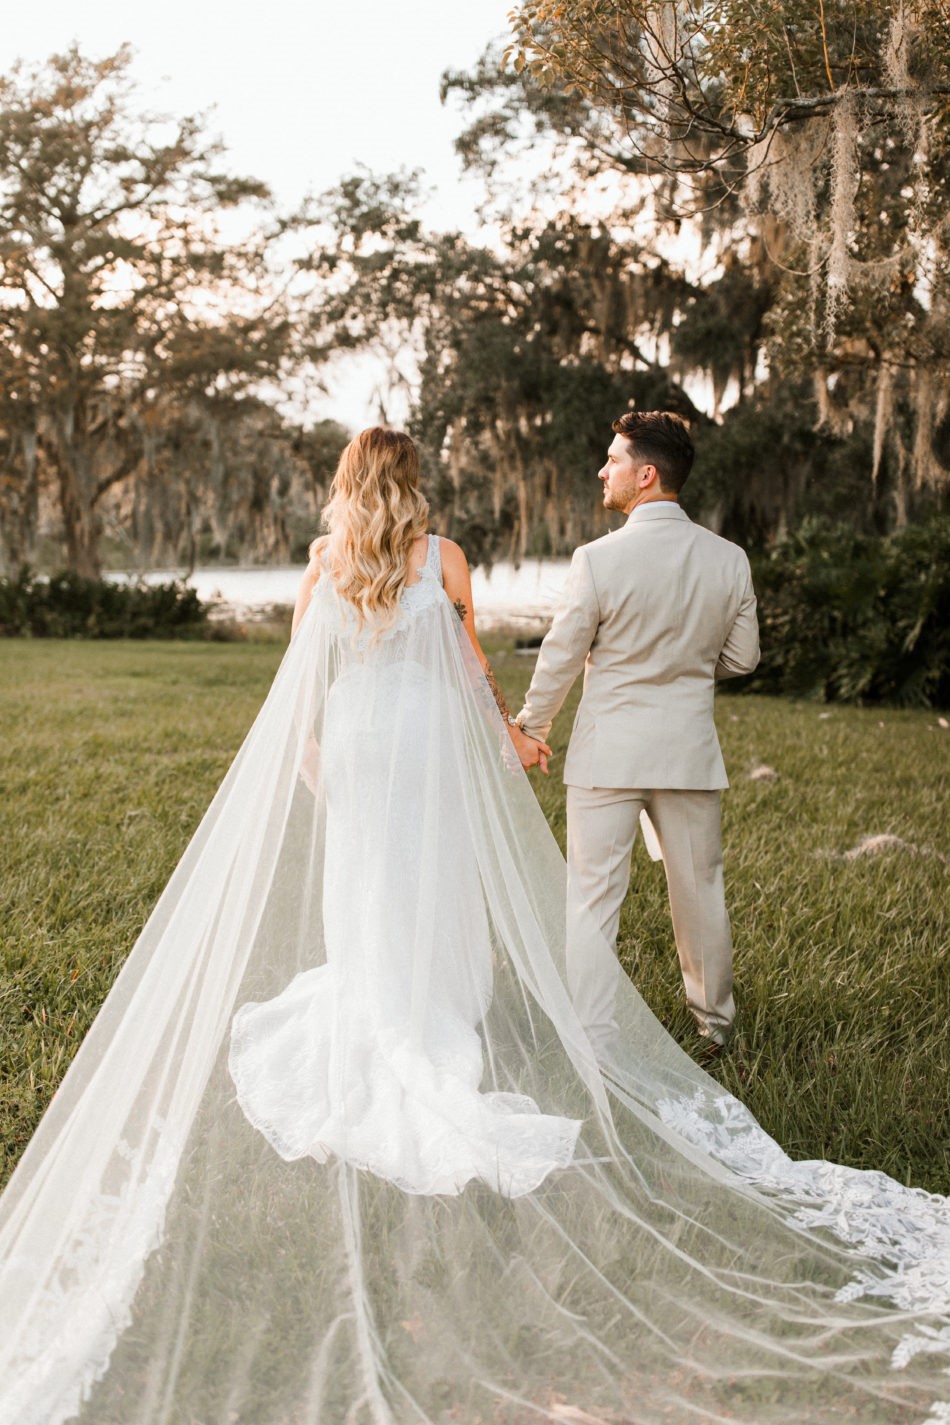 Groom Walking with Real Bride Wearing Bridal Cape and Maggie Sottero Wedding Dress